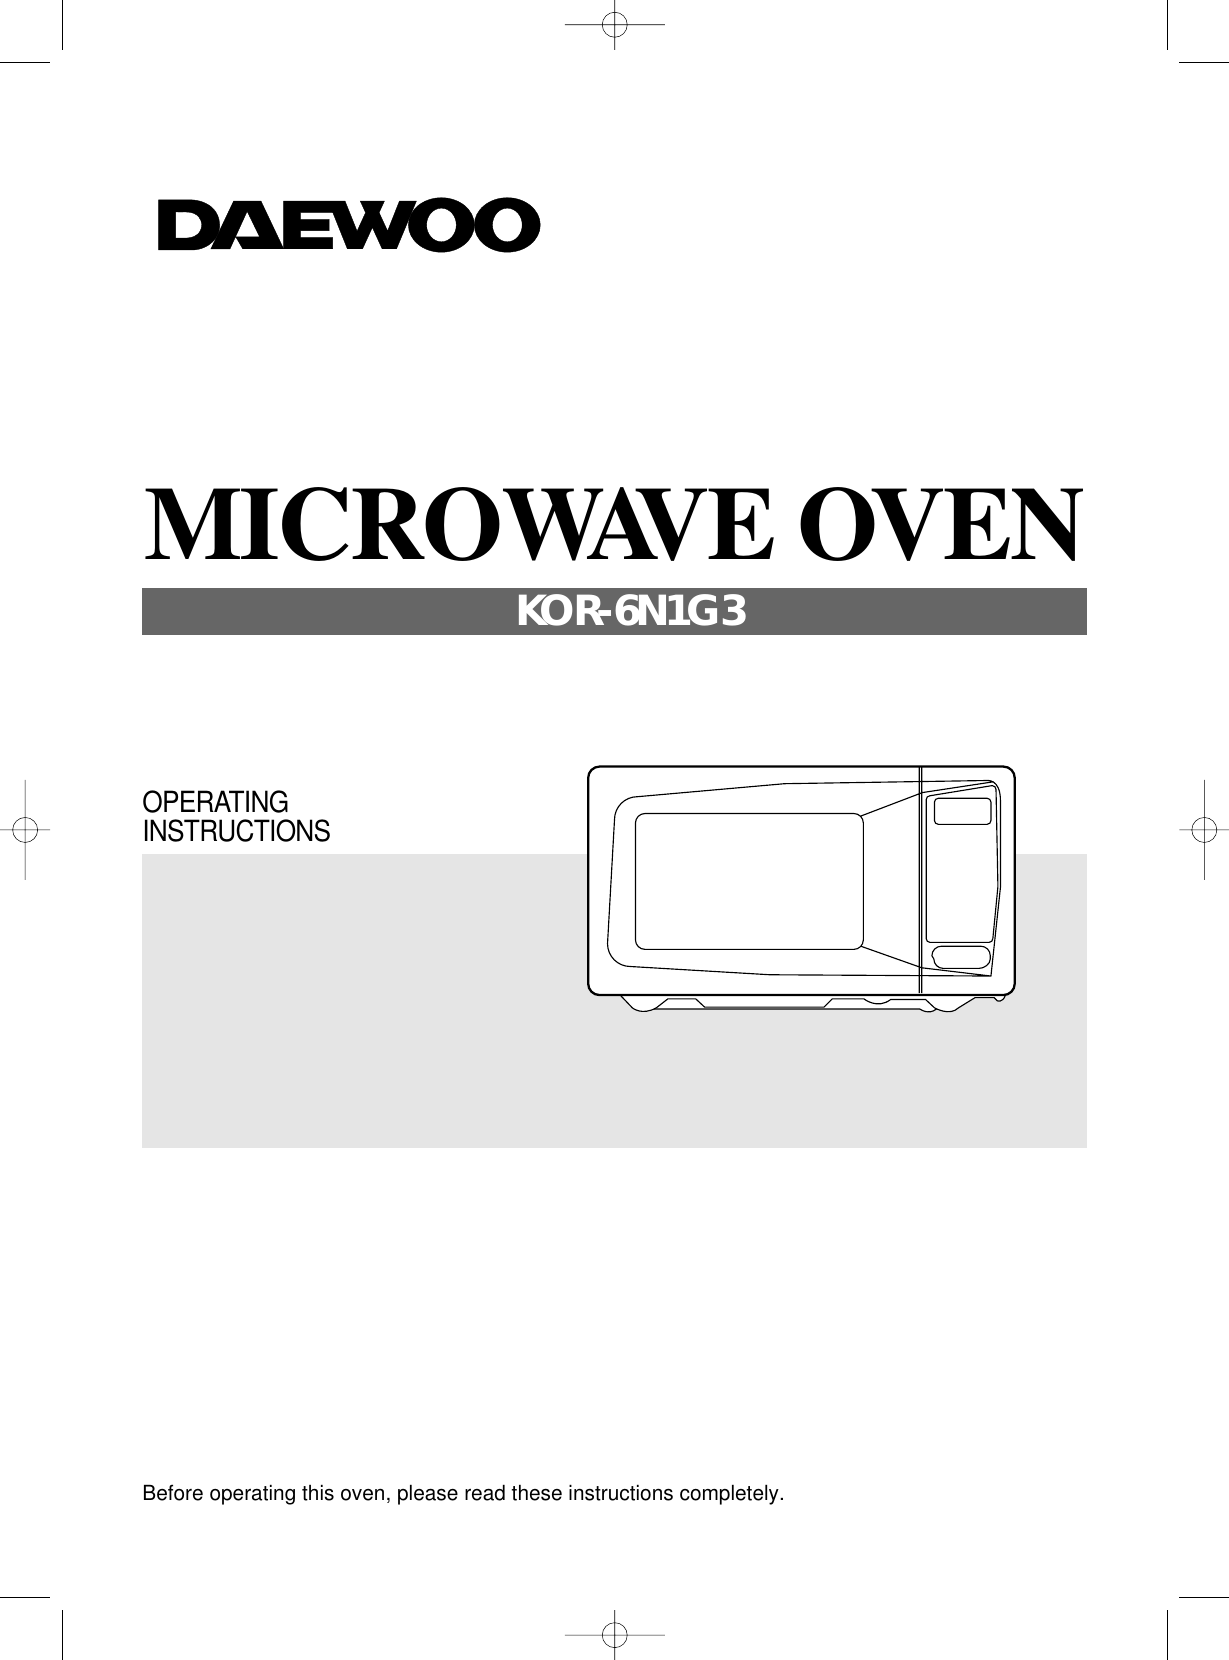 Before operating this oven, please read these instructions completely.OPERATINGINSTRUCTIONSMICROWAVE OVENKOR-6N1G3